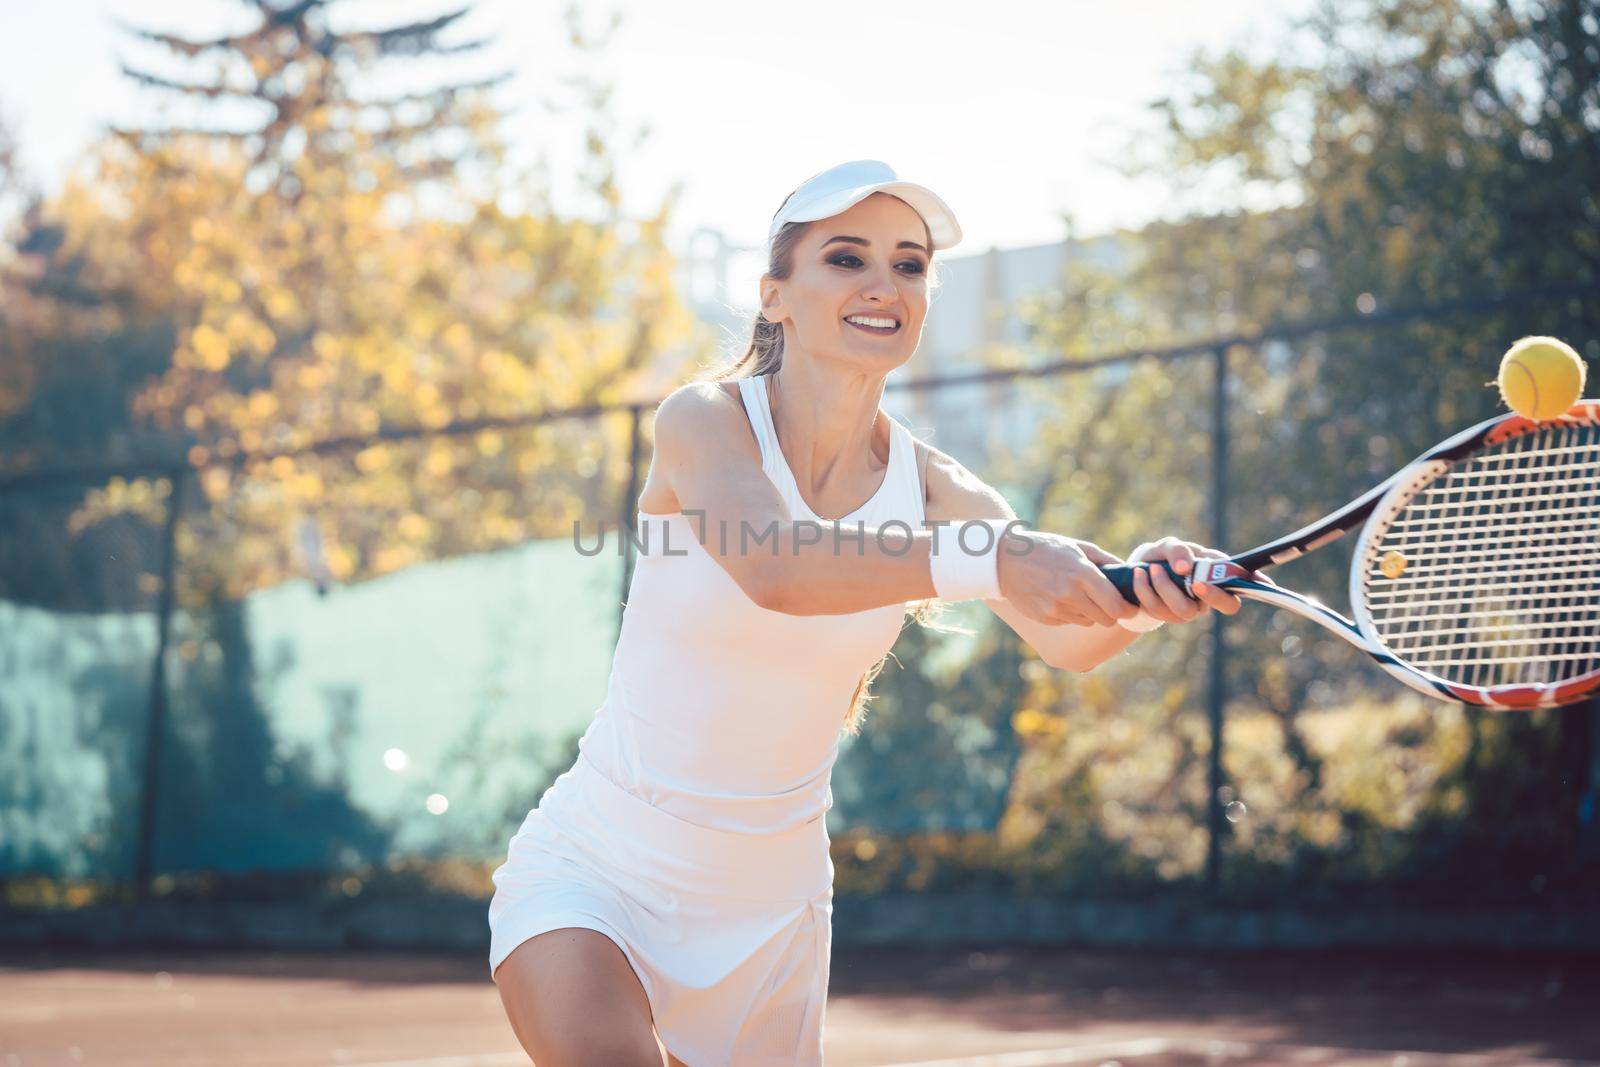 Woman playing tennis on court by Kzenon